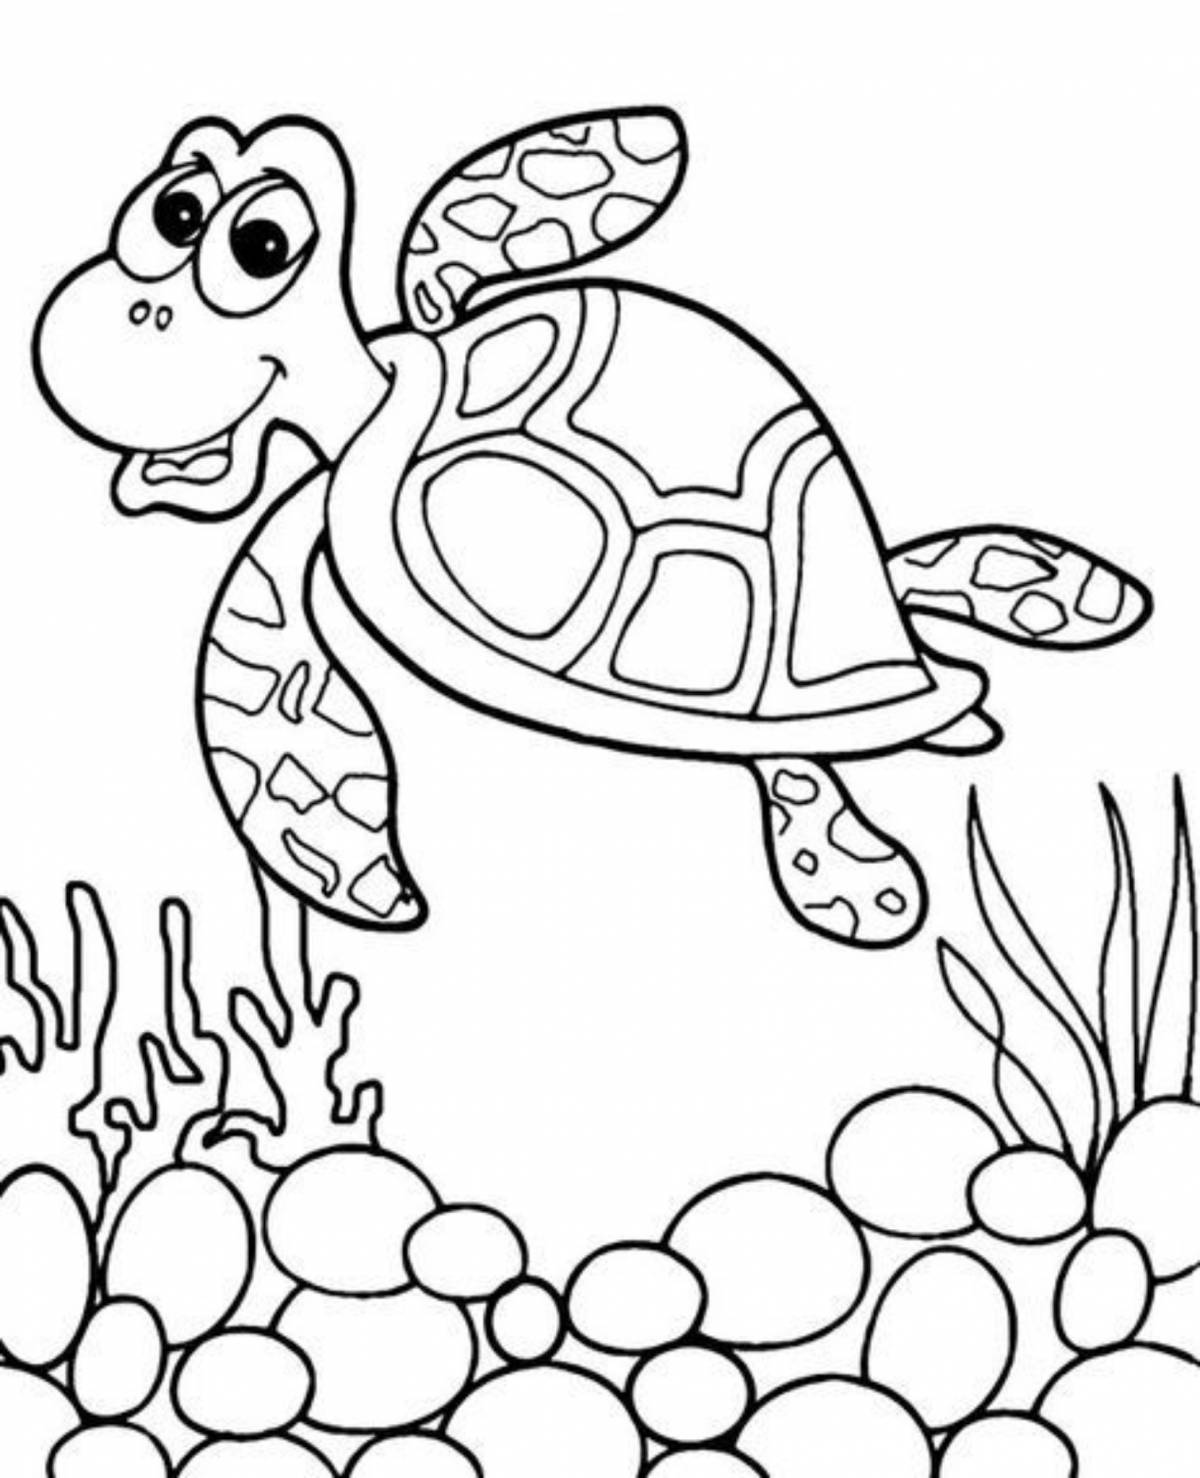 Creative turtle coloring book for kids